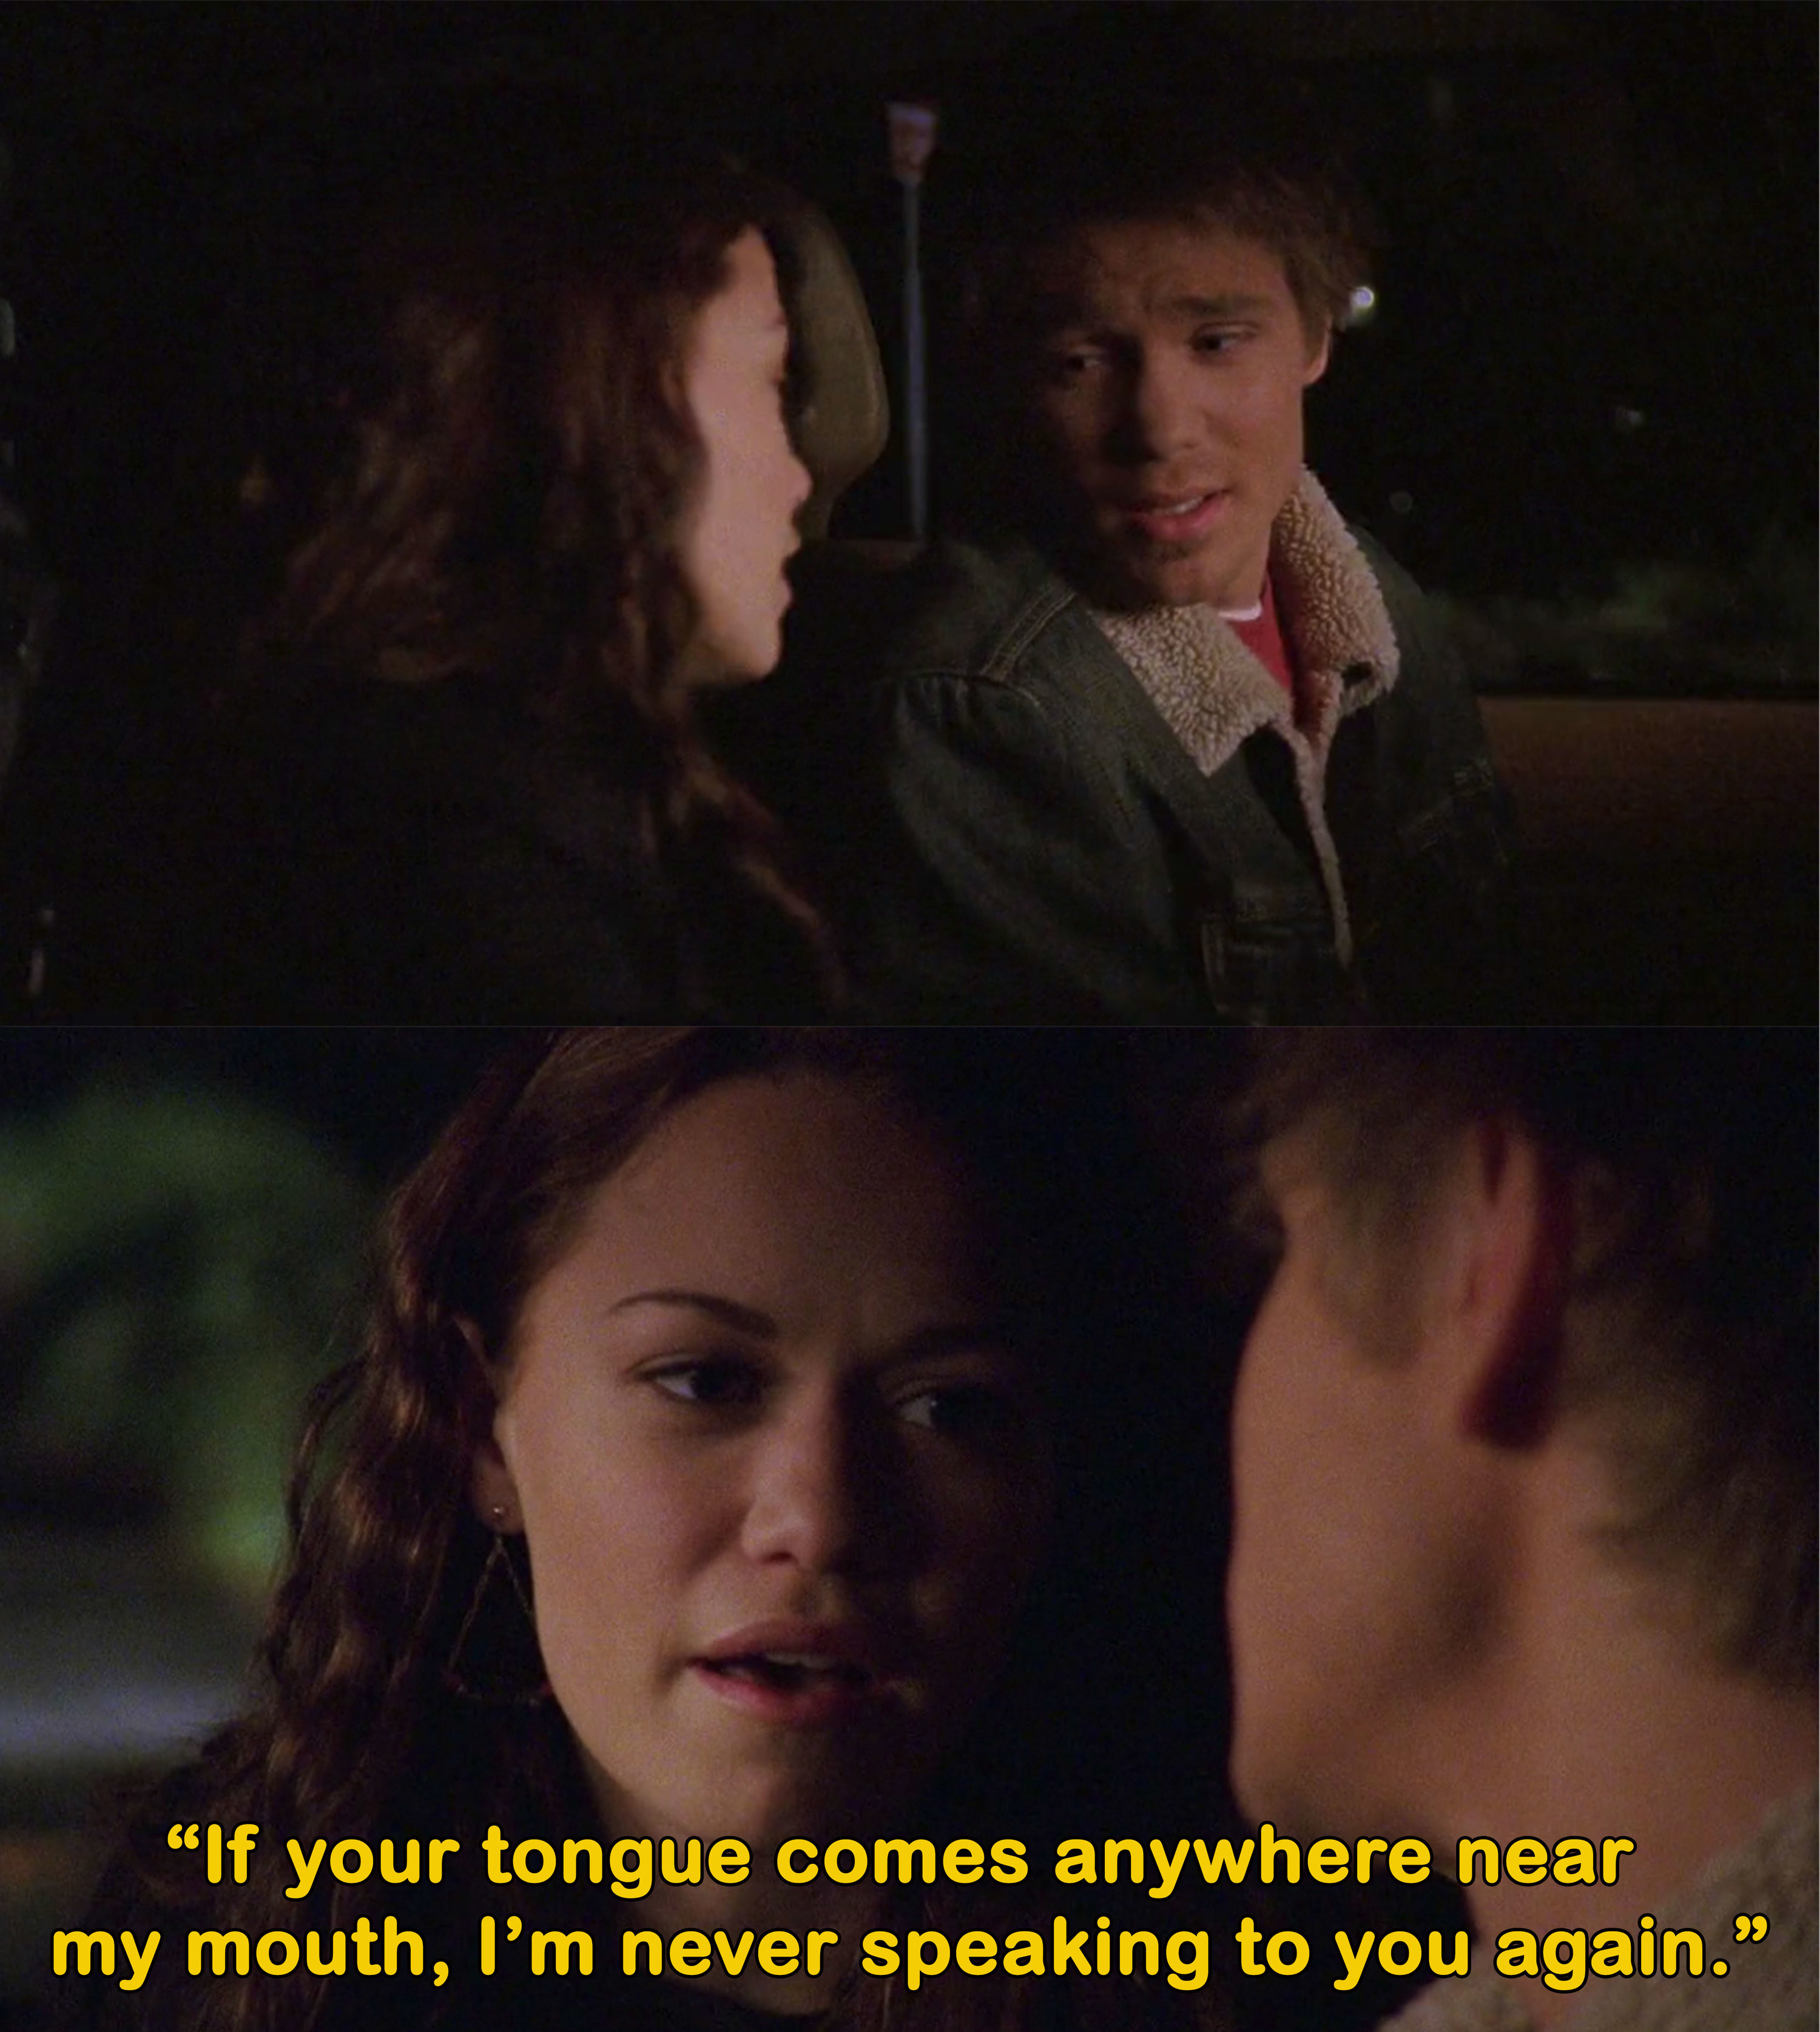 Lucas leans in to kiss Haley and she says she&#x27;ll never speak to him again if his tongue comes anywhere near her mouth